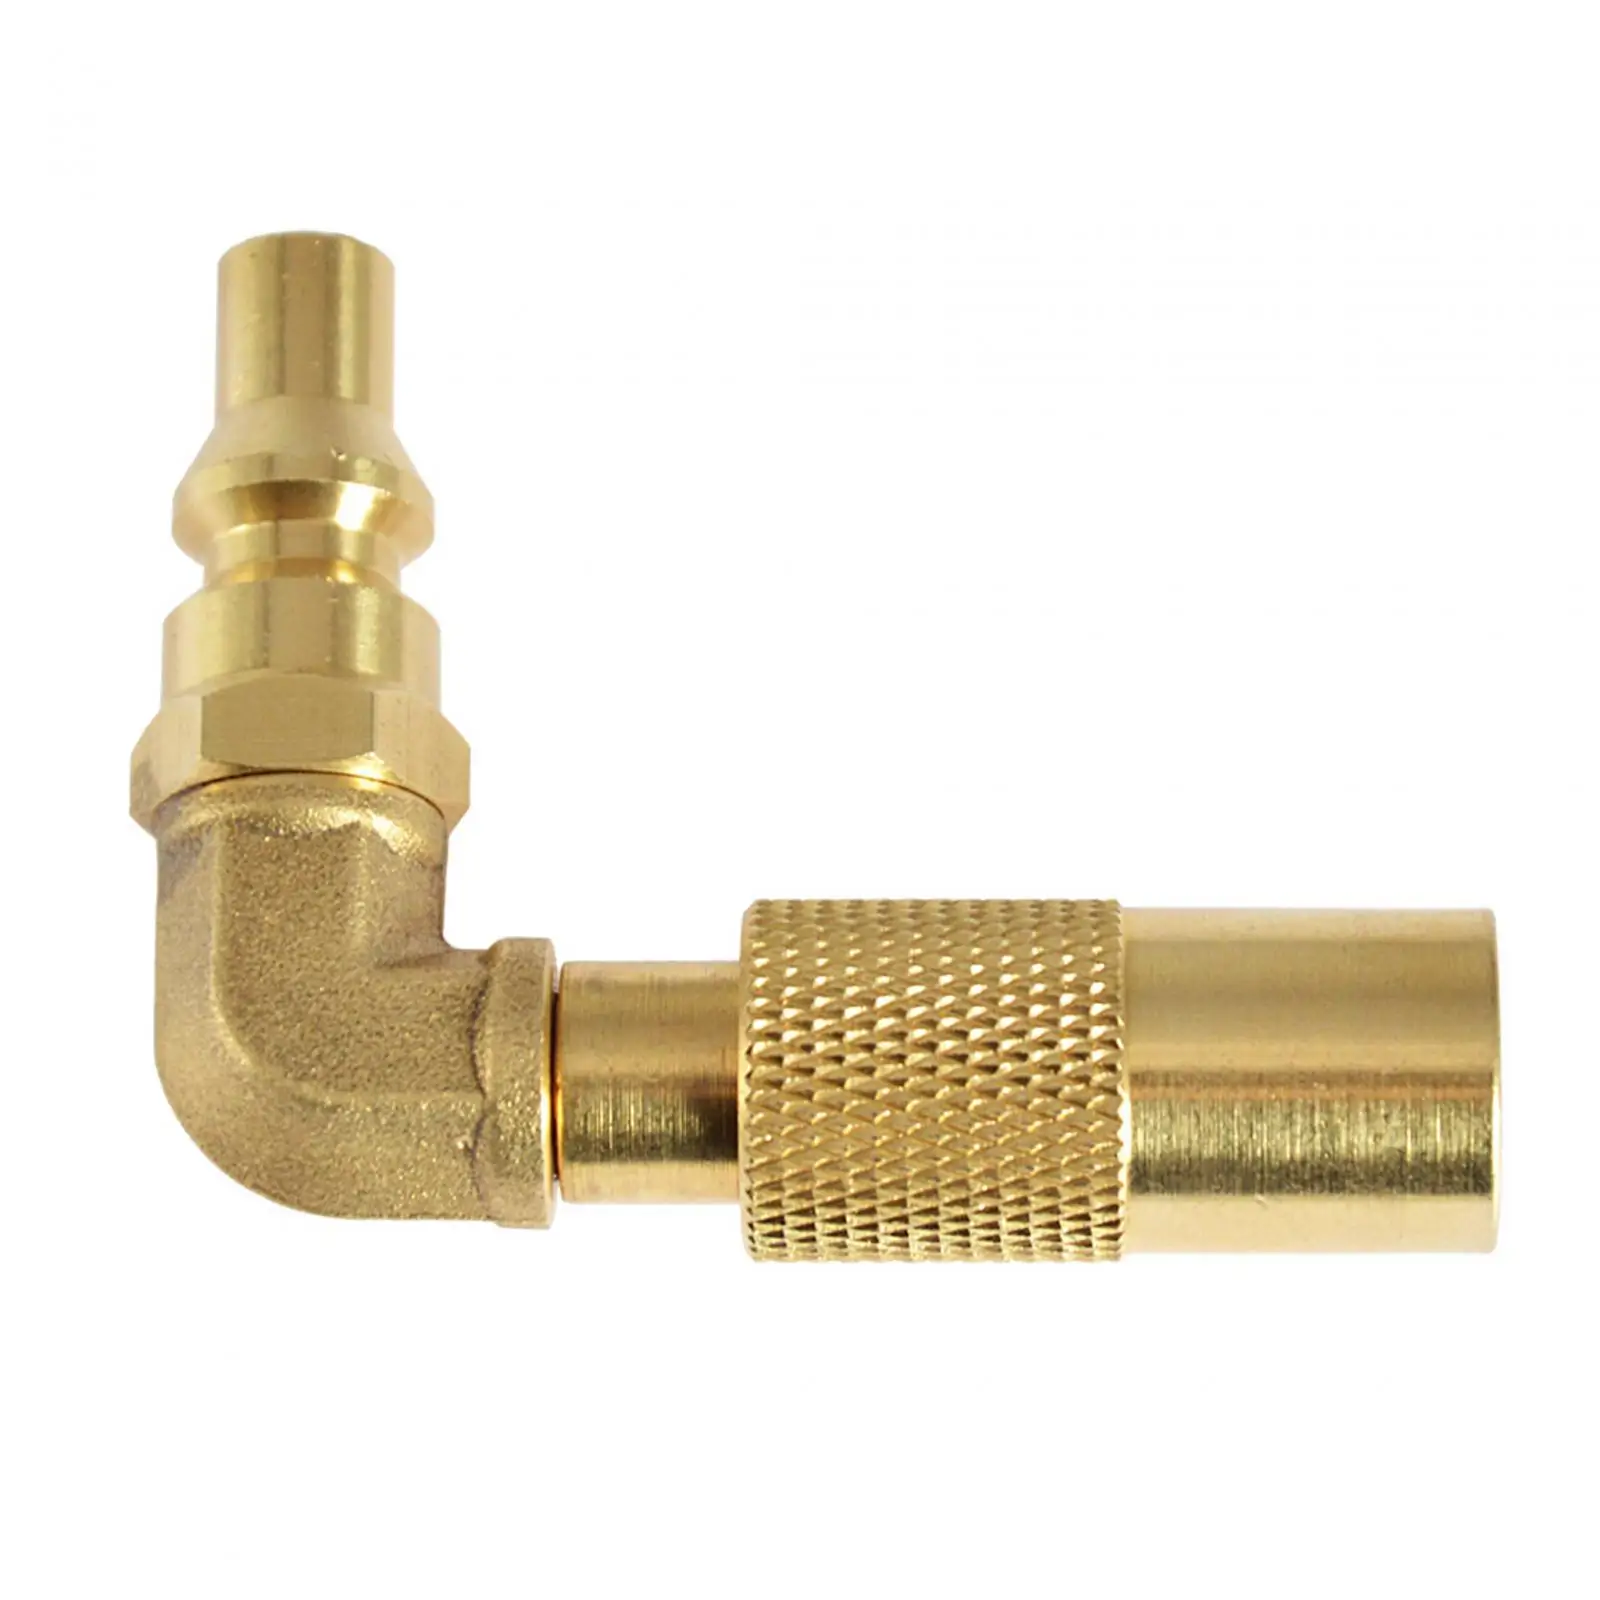 1/4` RV Quick Connect Adapter Conversion Fitting Elbow Brass Propane Gas Propane Elbow Adapter for Grill RV BBQ Trailer Camping